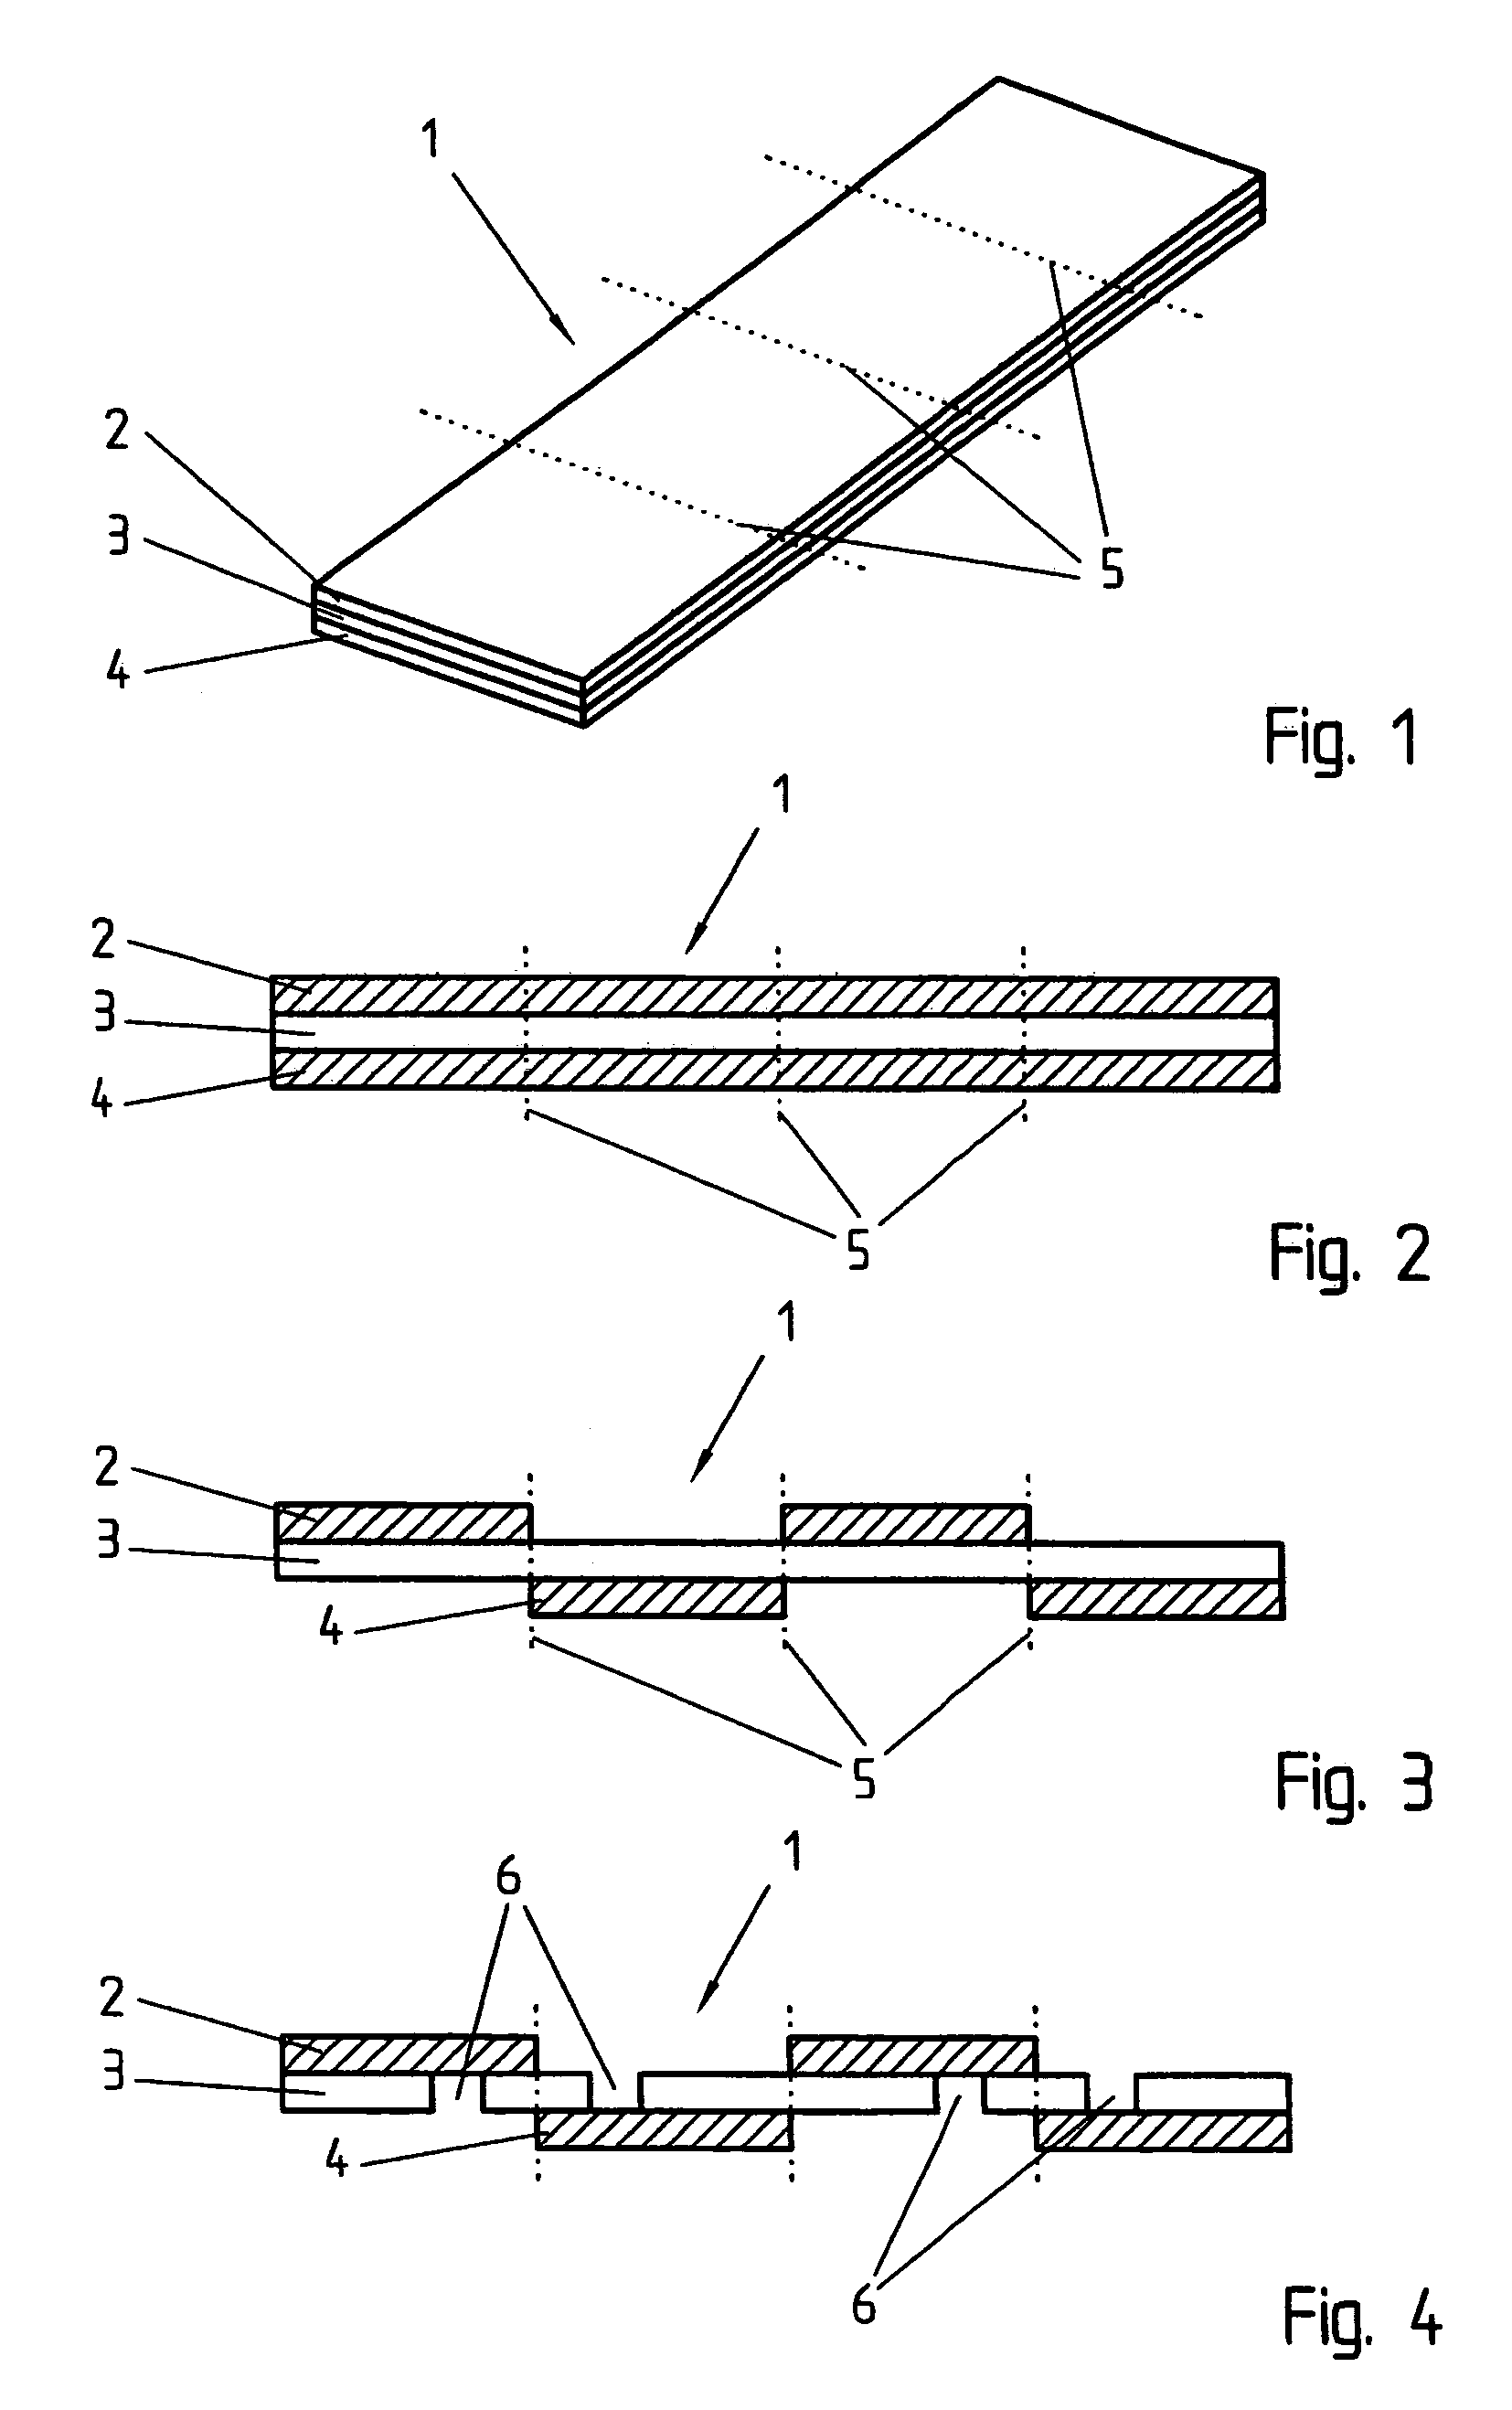 Multilayer circuit including stacked layers of insulating material and conductive sections